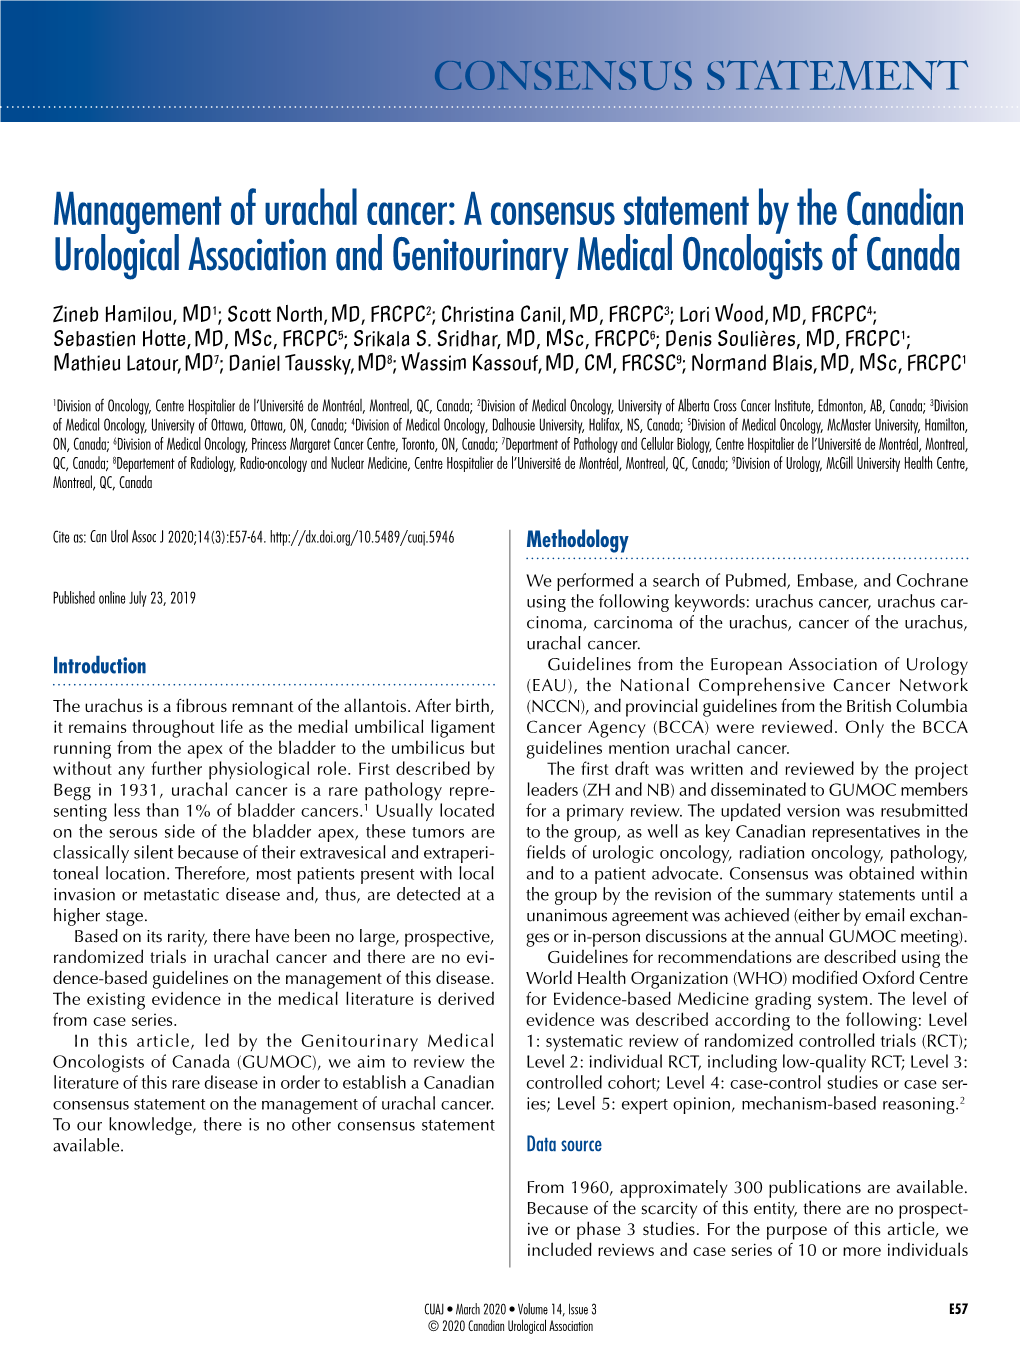 Management of Urachal Cancer: a Consensus Statement by the Canadian Urological Association and Genitourinary Medical Oncologists of Canada